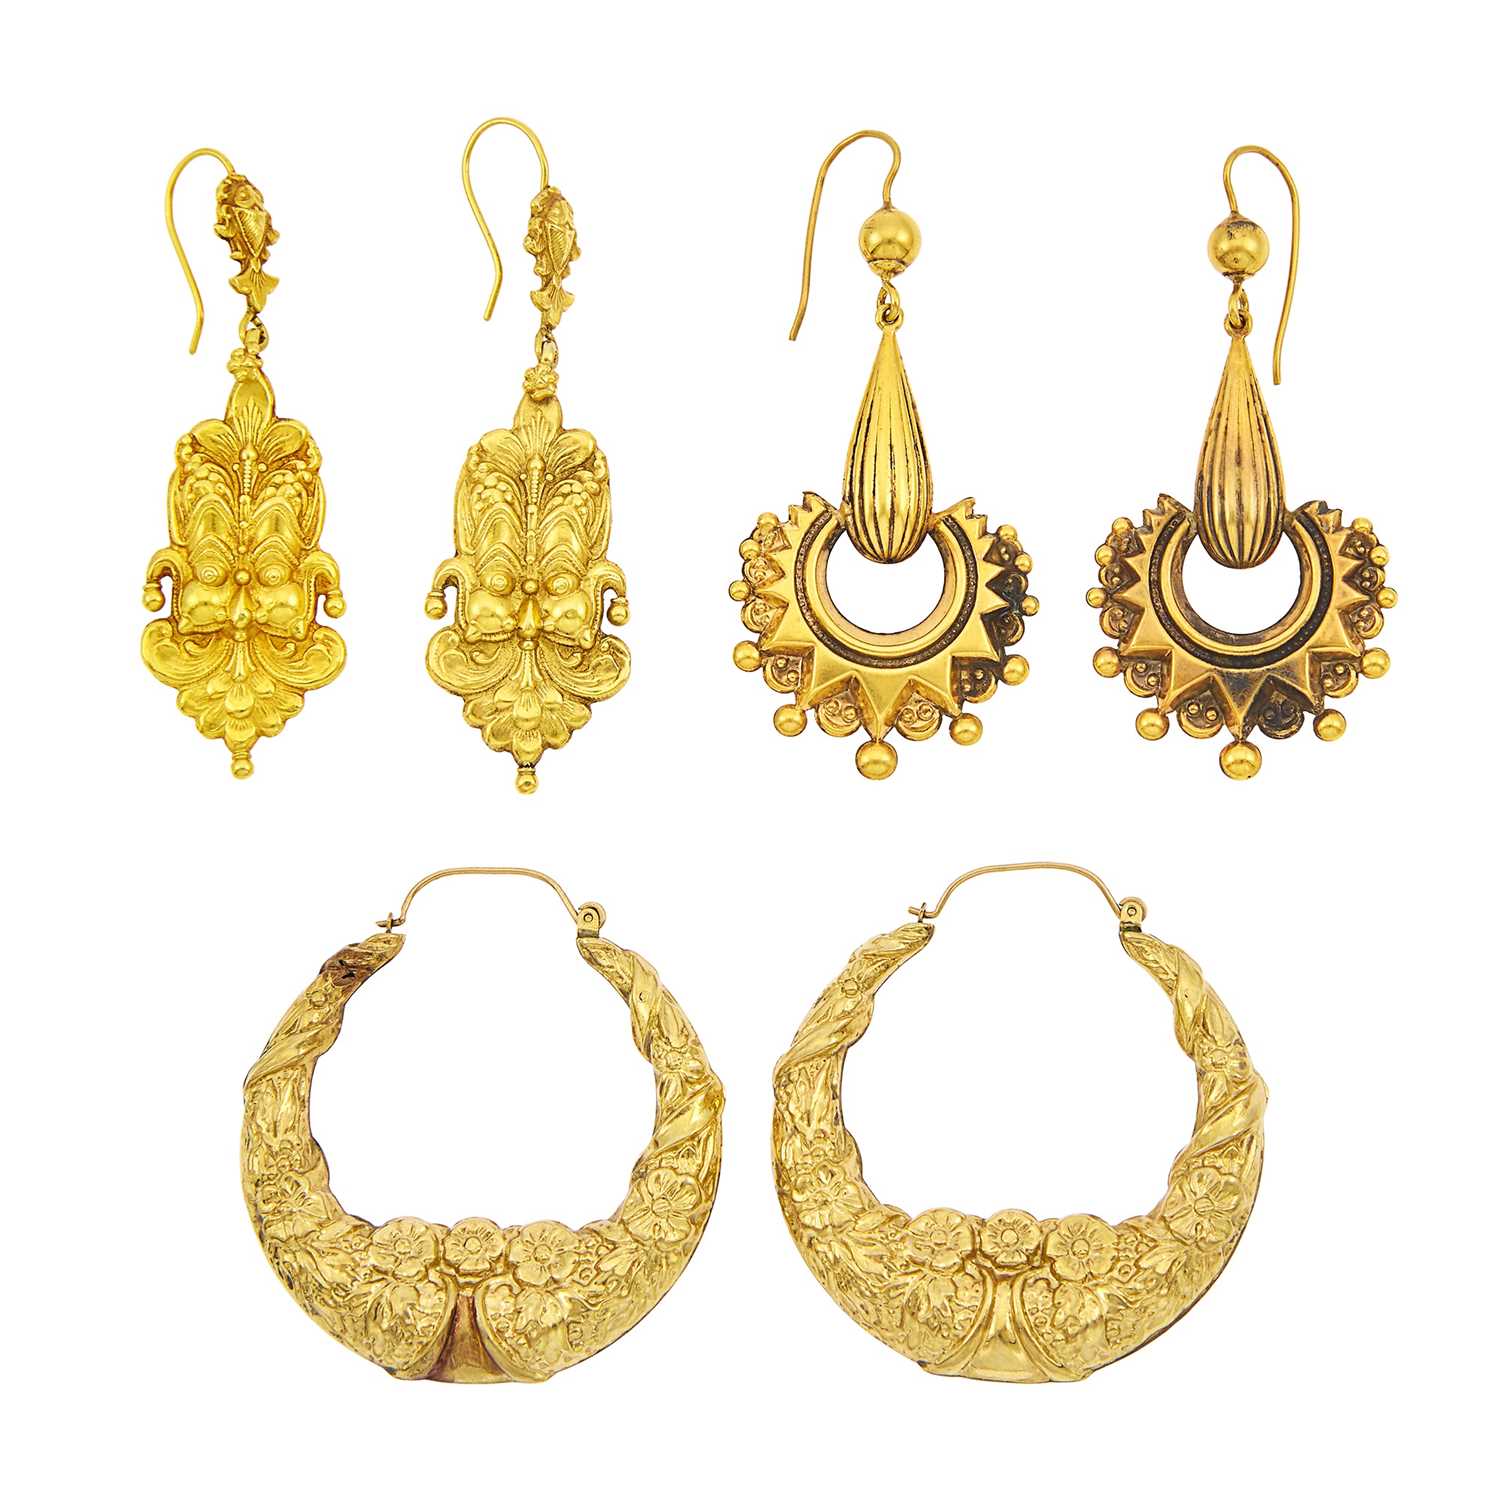 Lot 1117 - Three Pairs of Gold and Low Karat Gold Earrings